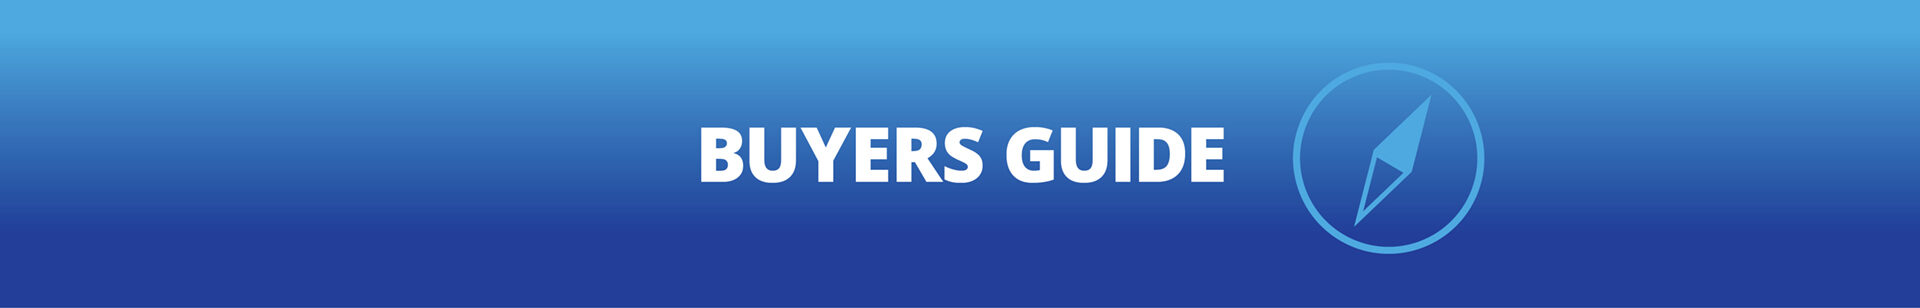 Buyers Guide banner image